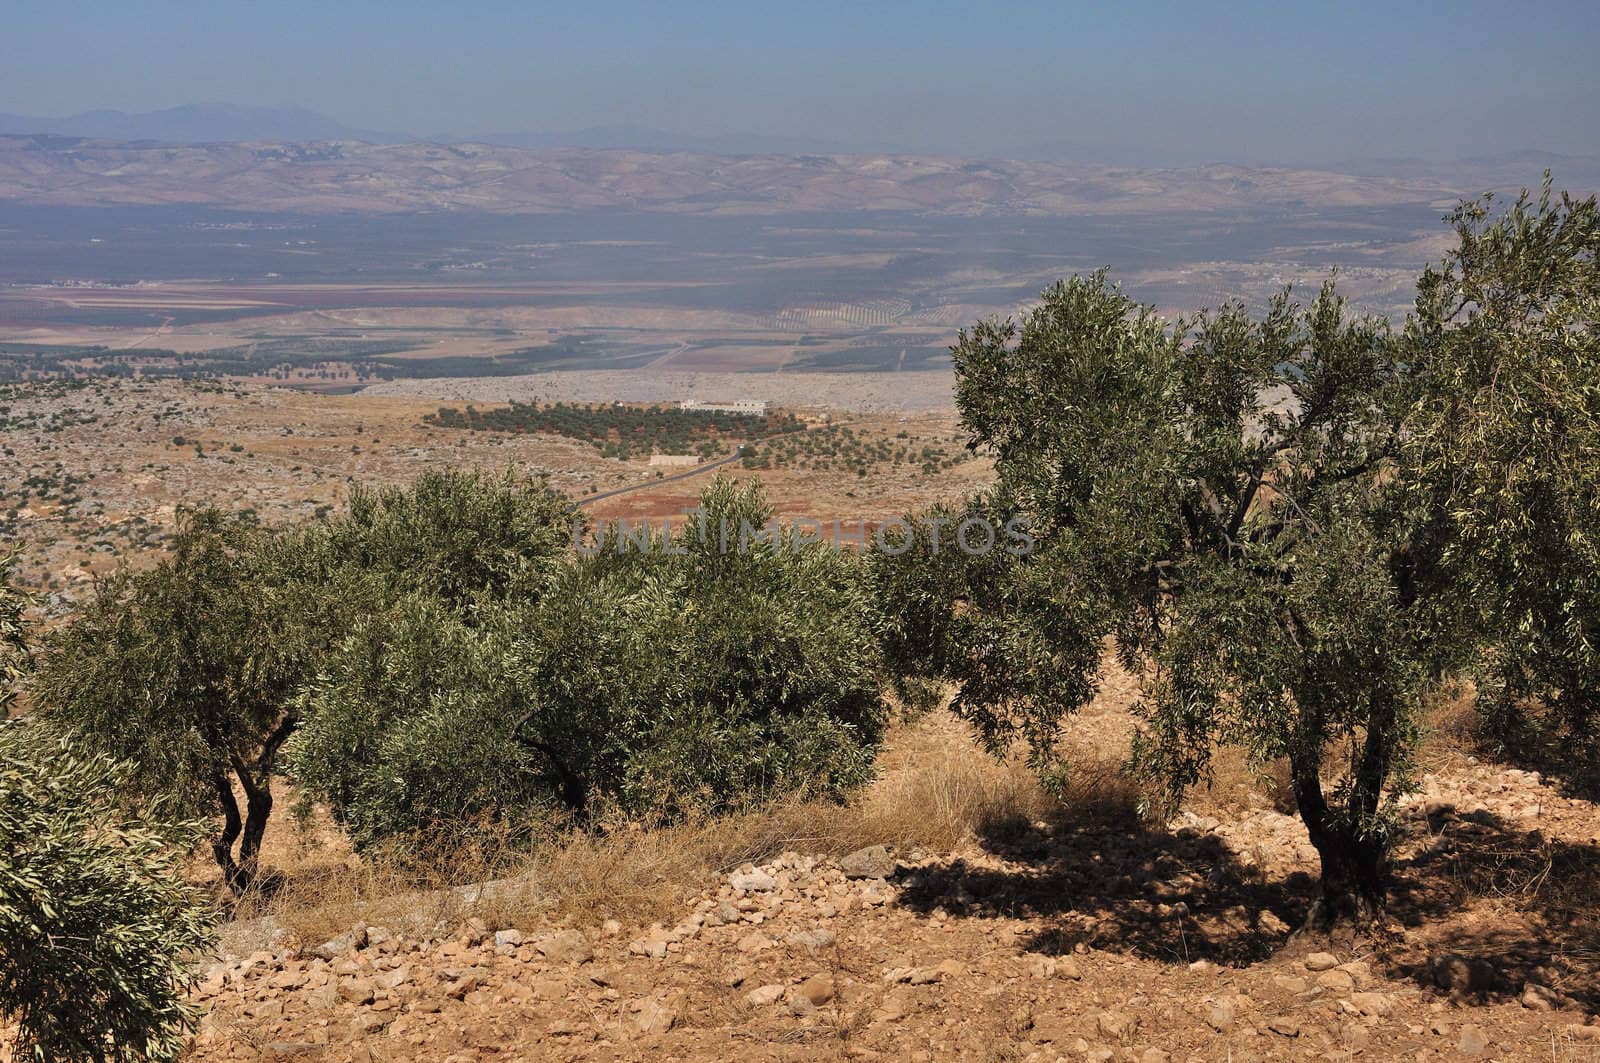 Small trees, bushes, at desert view, in Syria from St. Simeon.